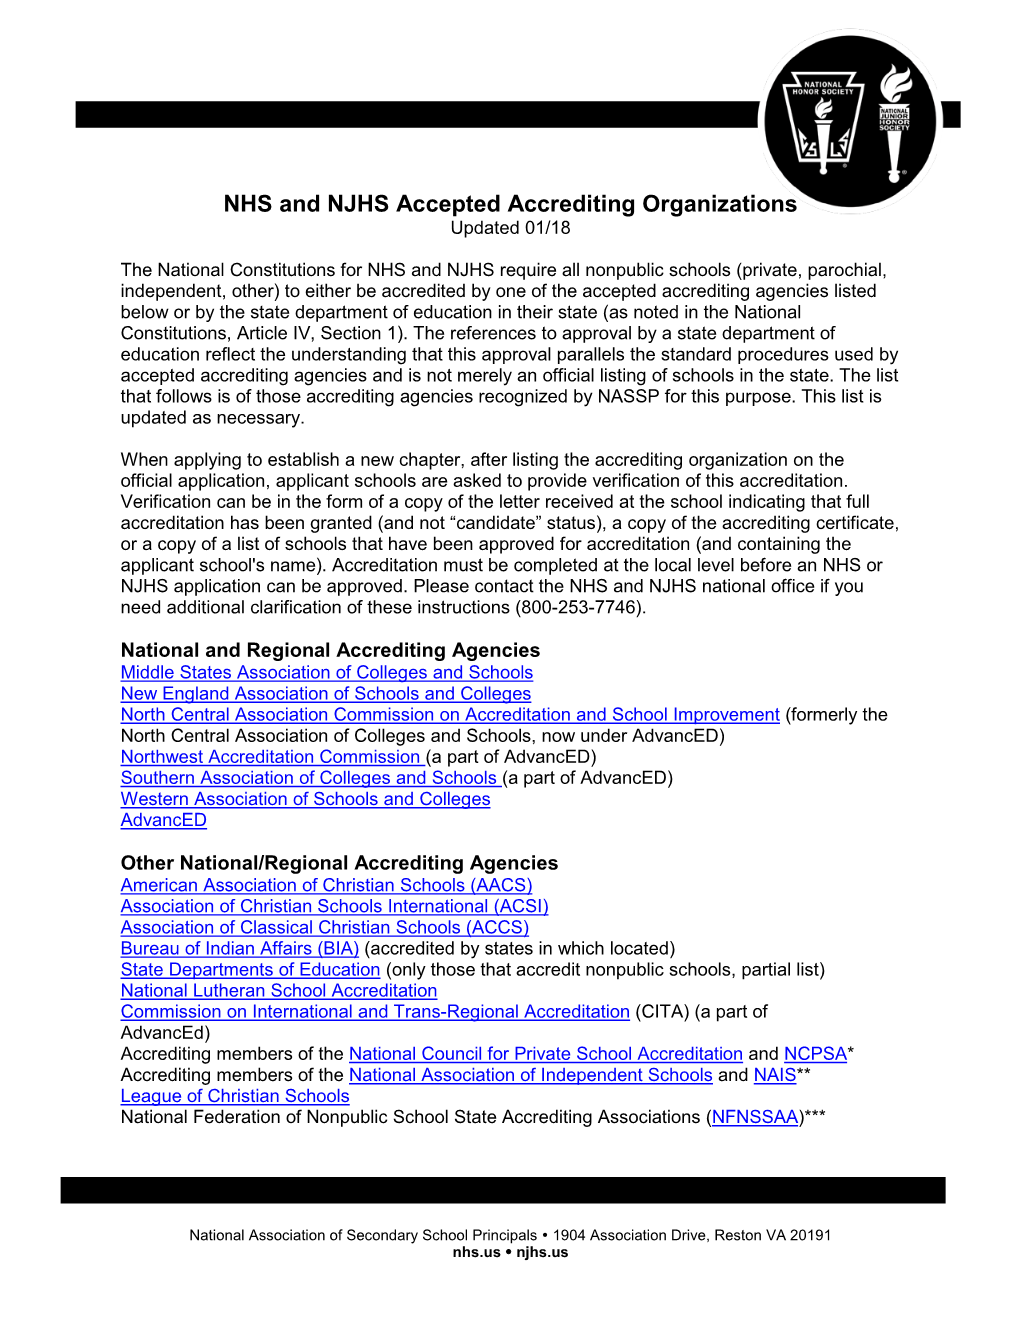 NHS and NJHS Accepted Accrediting Organizations Updated 01/18